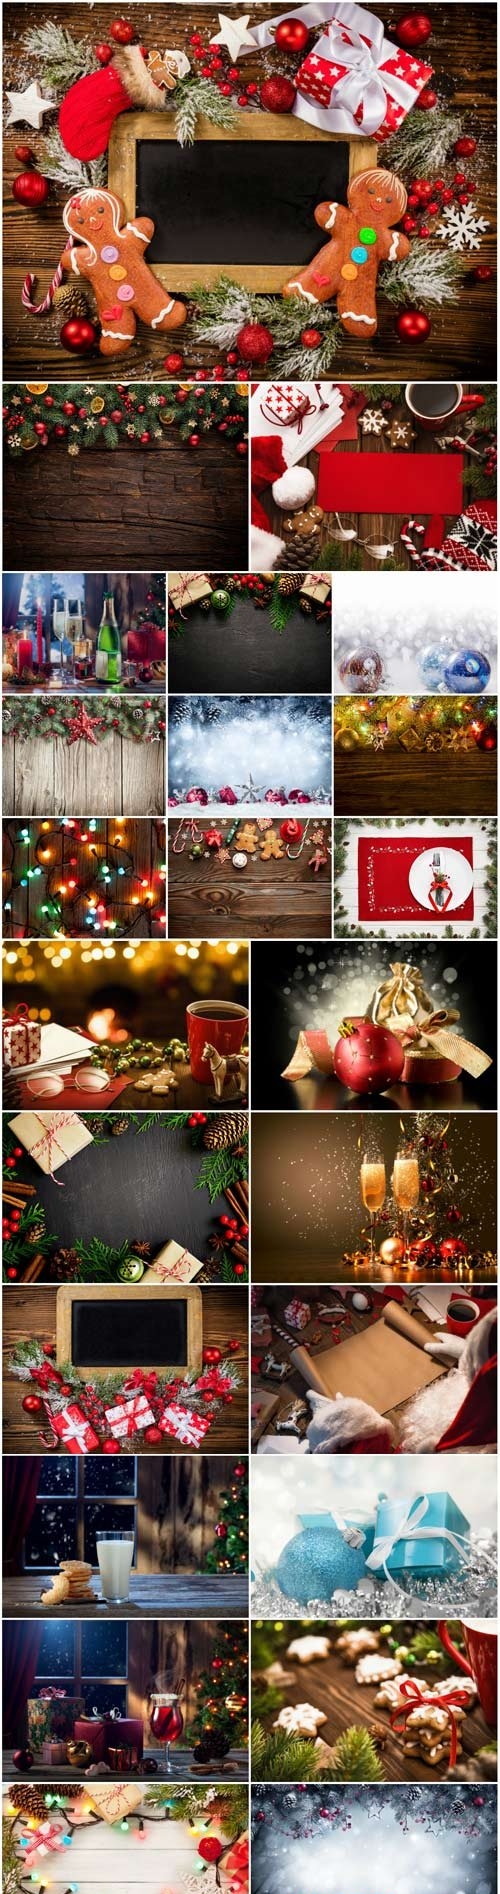 New Year and Christmas stock photos - 55